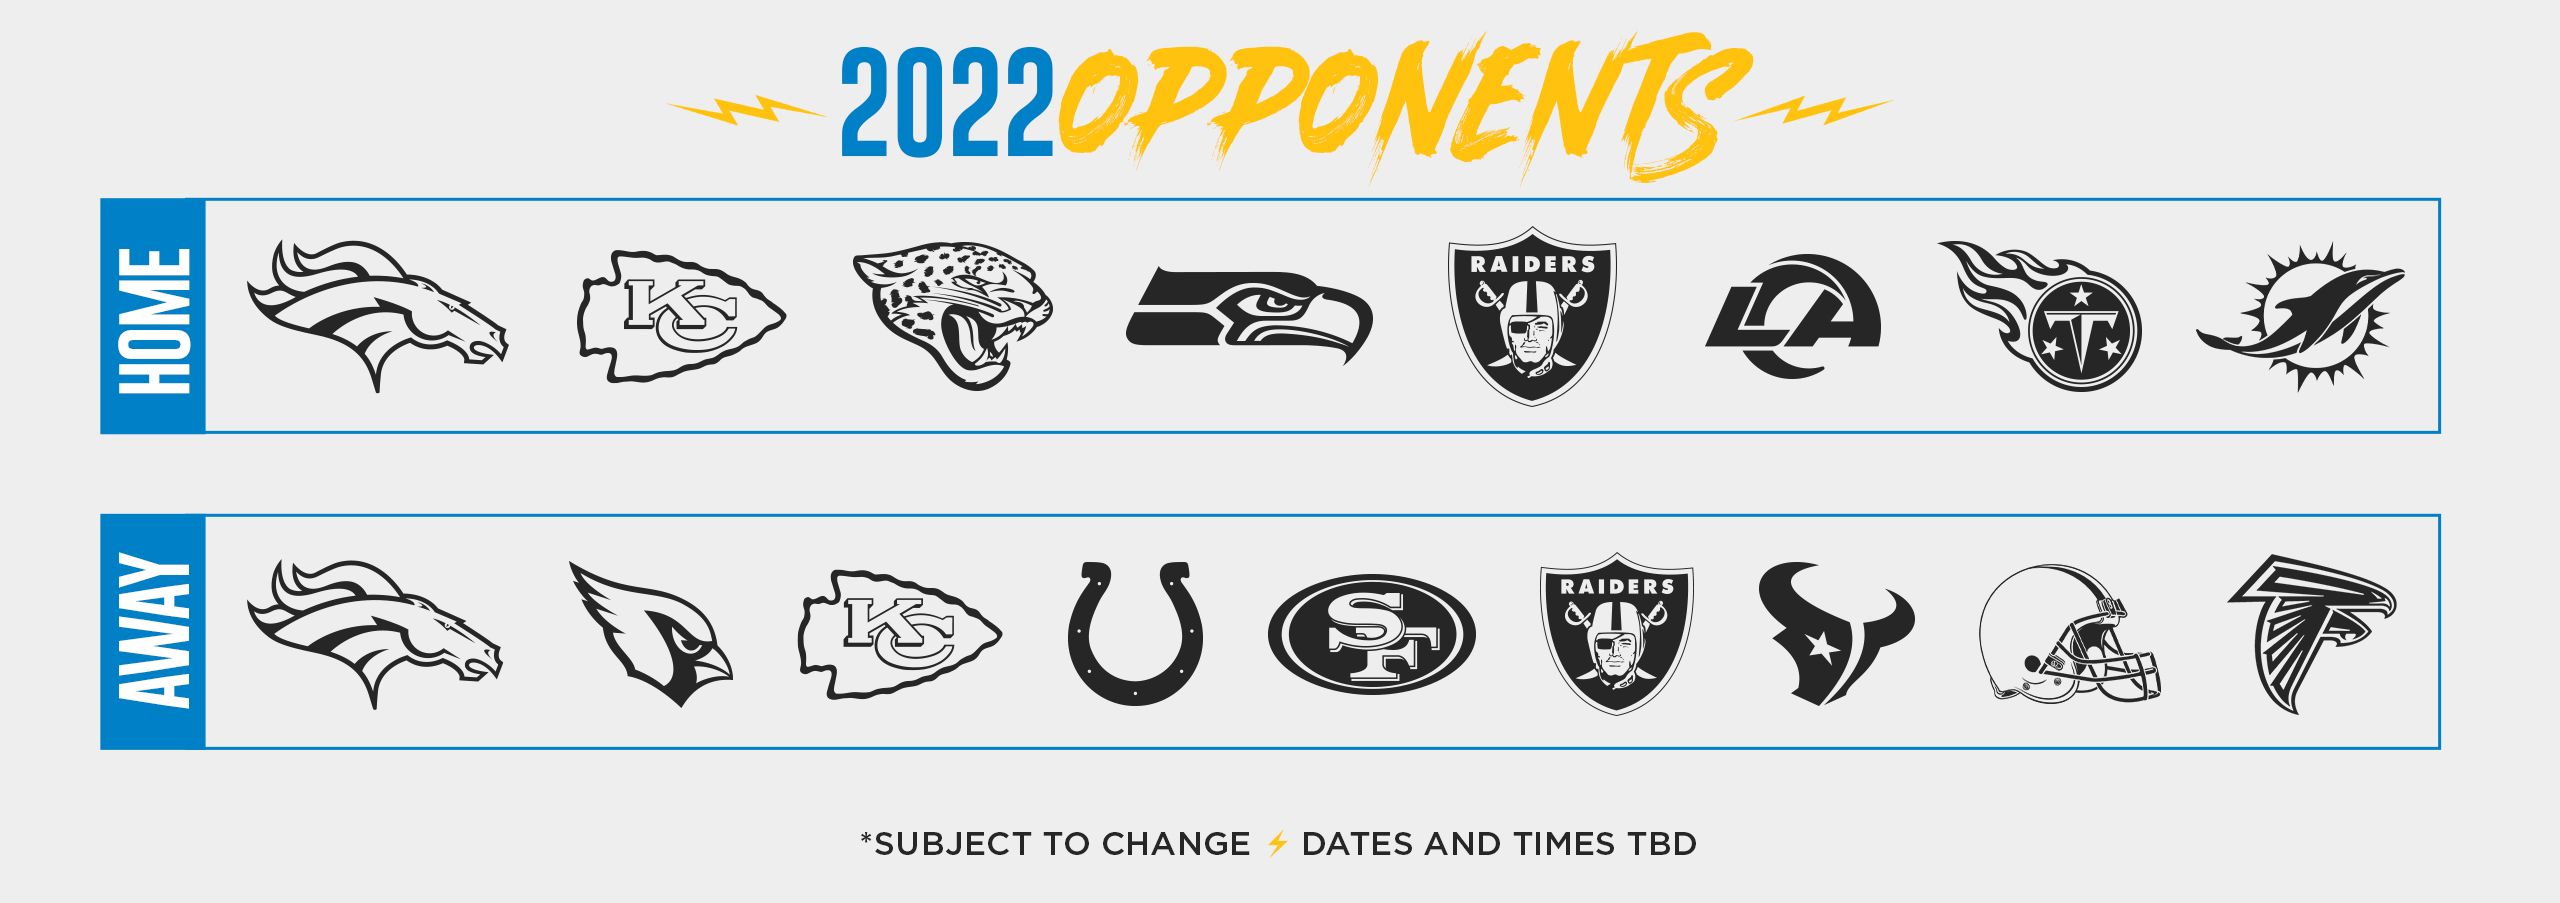 Los Angeles Chargers 2022 Schedule Chargers 2022 Future Opponents | Los Angeles Chargers - Chargers.com